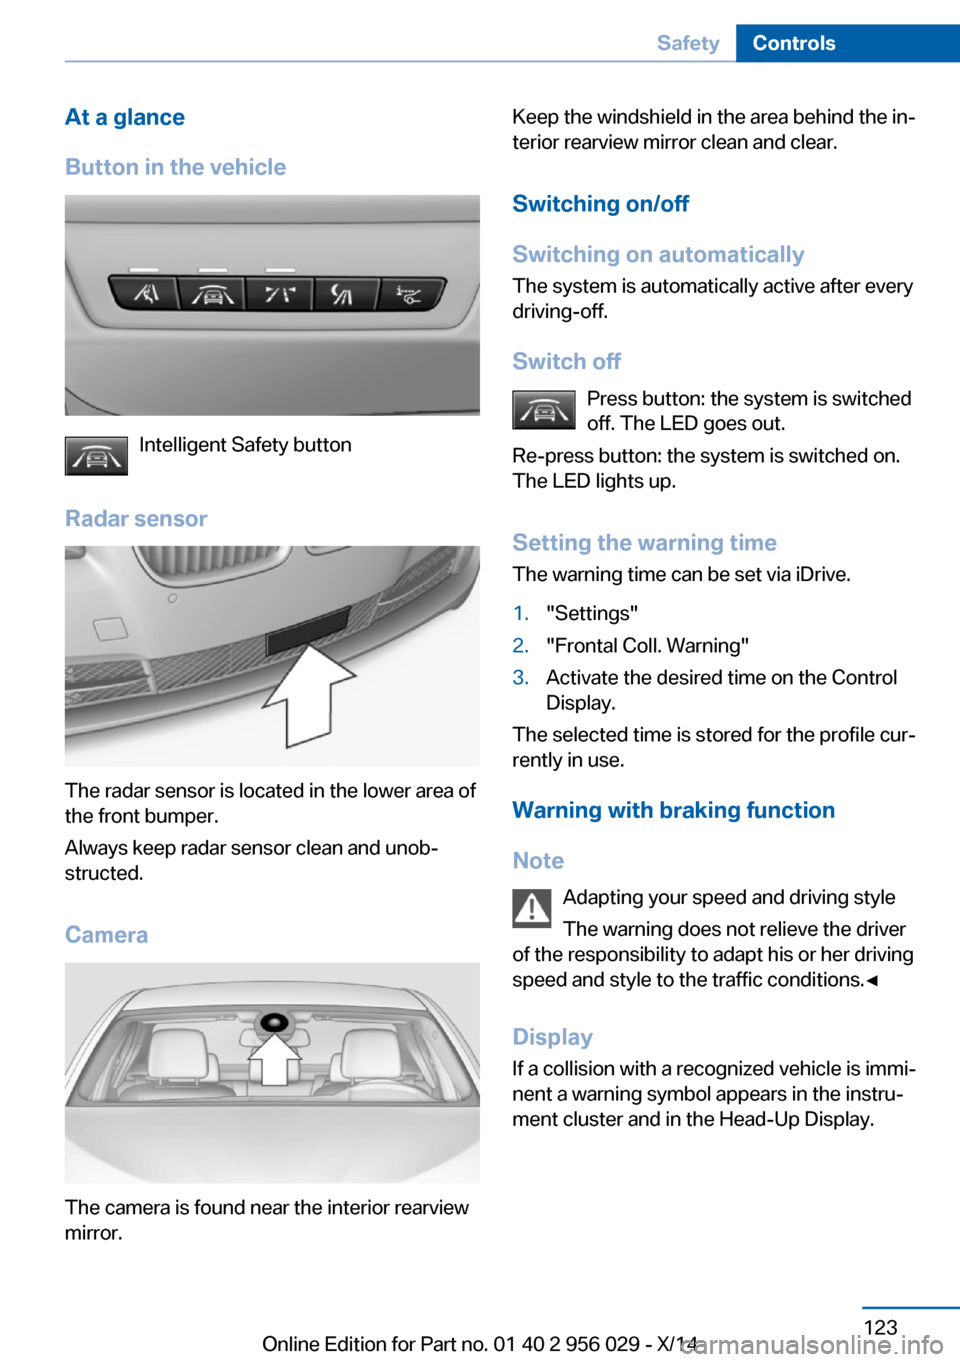 BMW 7 SERIES 2014 F01 User Guide At a glance
Button in the vehicle
Intelligent Safety button
Radar sensor
The radar sensor is located in the lower area of
the front bumper.
Always keep radar sensor clean and unob‐
structed.
Camera
